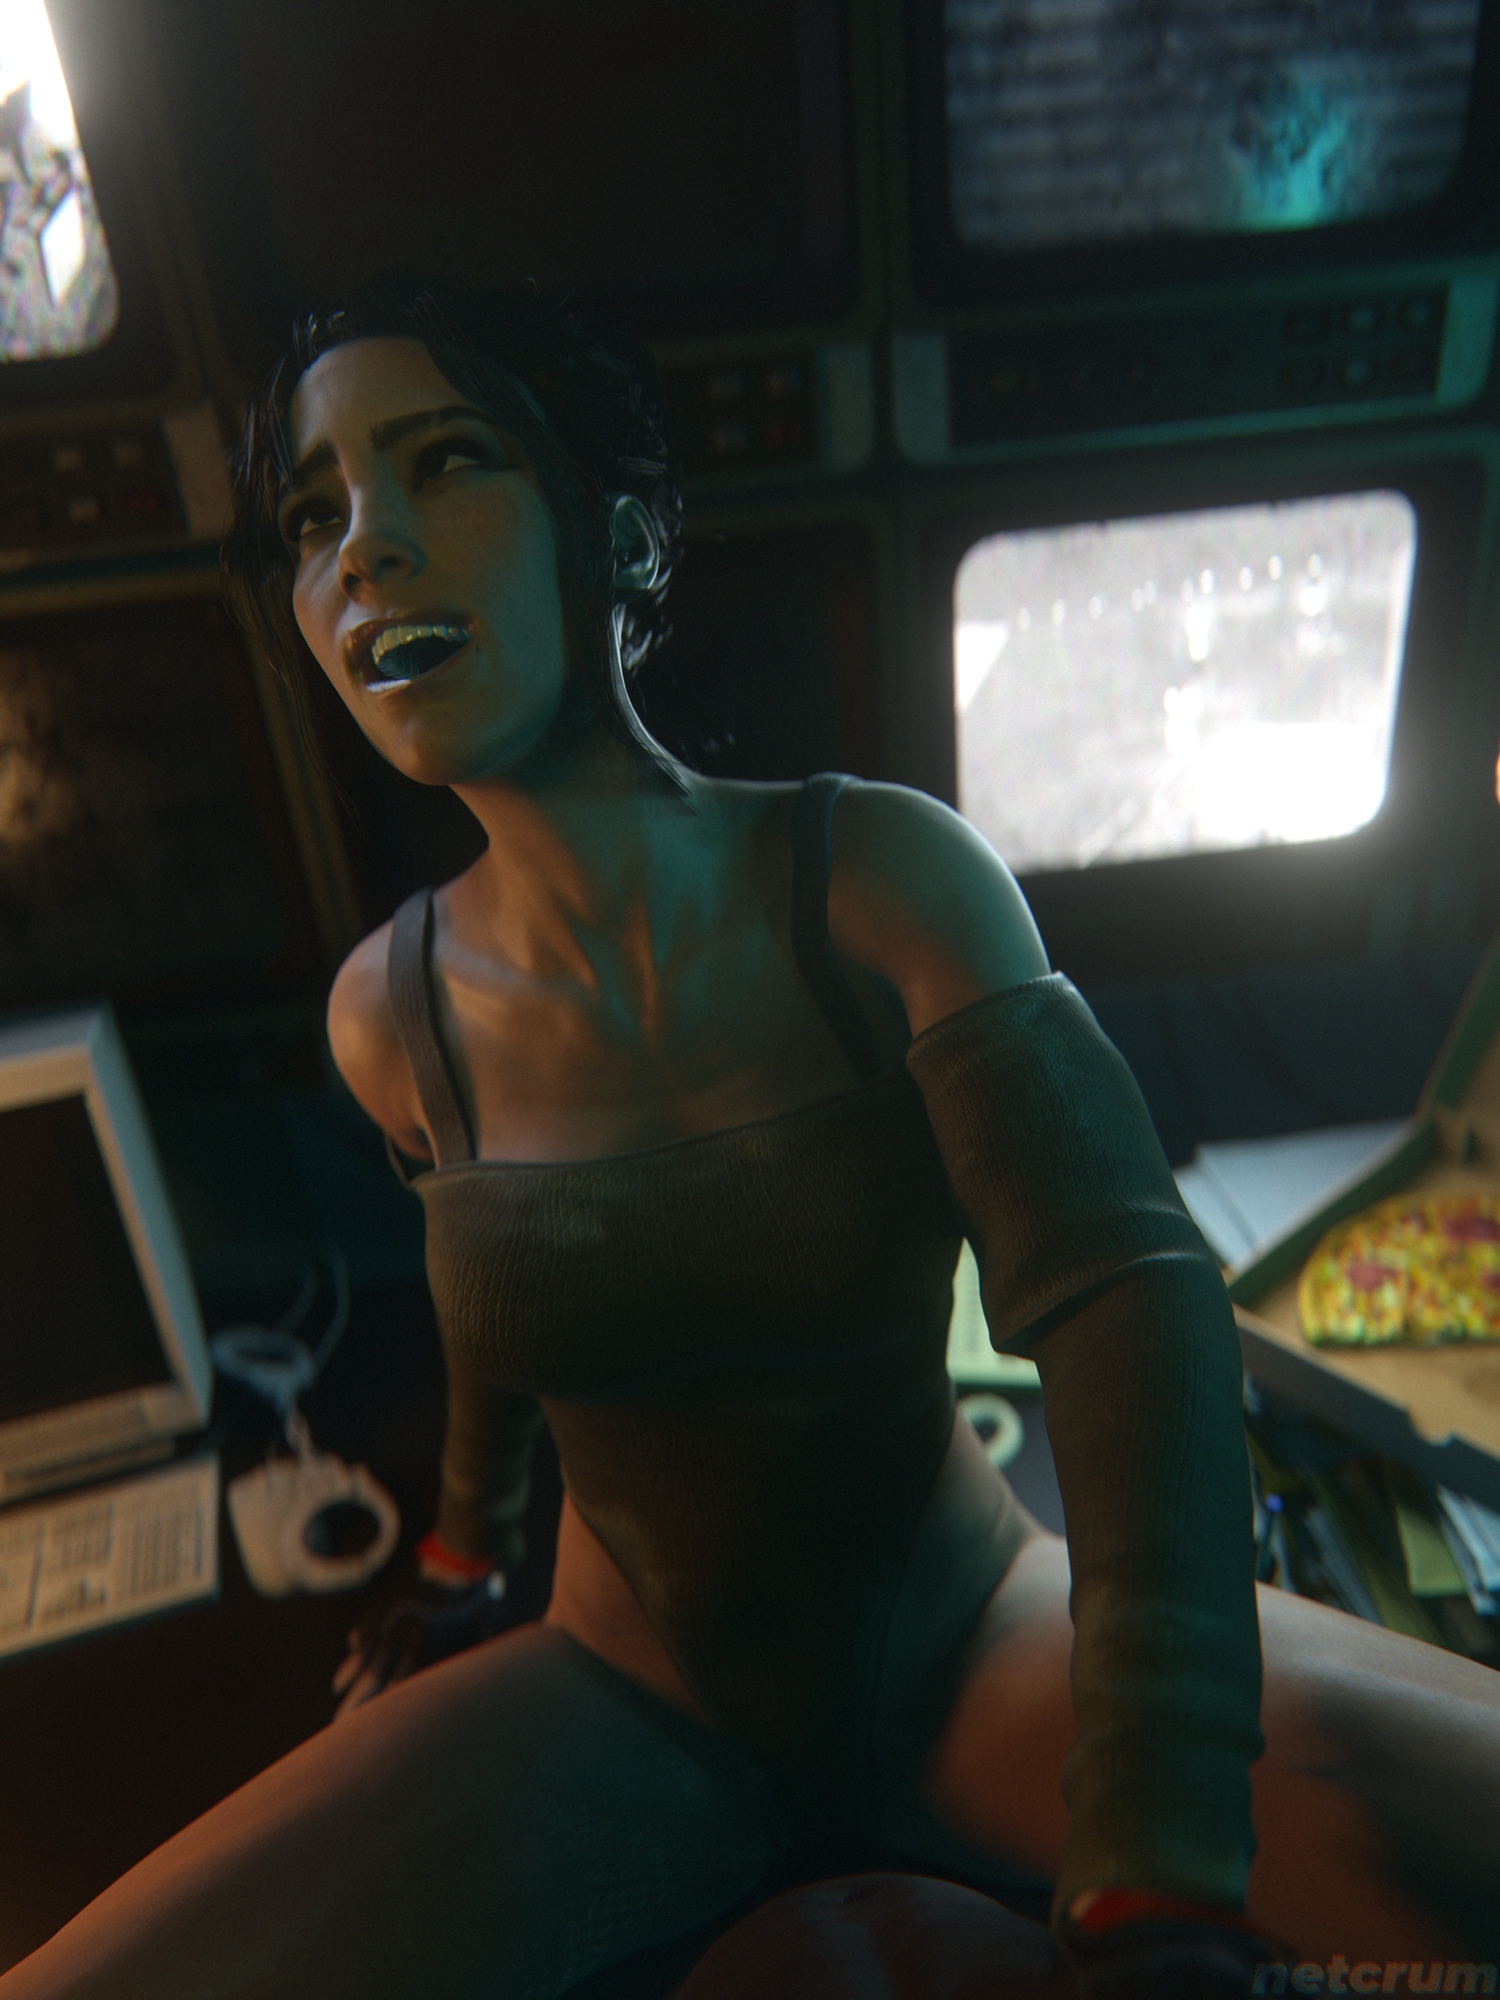 Panams Alternate Mission Panam Palmer Cyberpunk2077 Cyberpunk Big Tits Big Cock Big Breasts Big Dick Big penis Big Boobs Natural Boobs Natural Tits Natural Breast Submissive 1boy1girl Smile Open legs Wrapped Legs Interracial Partially_clothed Clothing Clothed Office Vaginal Vaginal Penetration Vaginal Sex Vaginal Insertion Cleavage 5